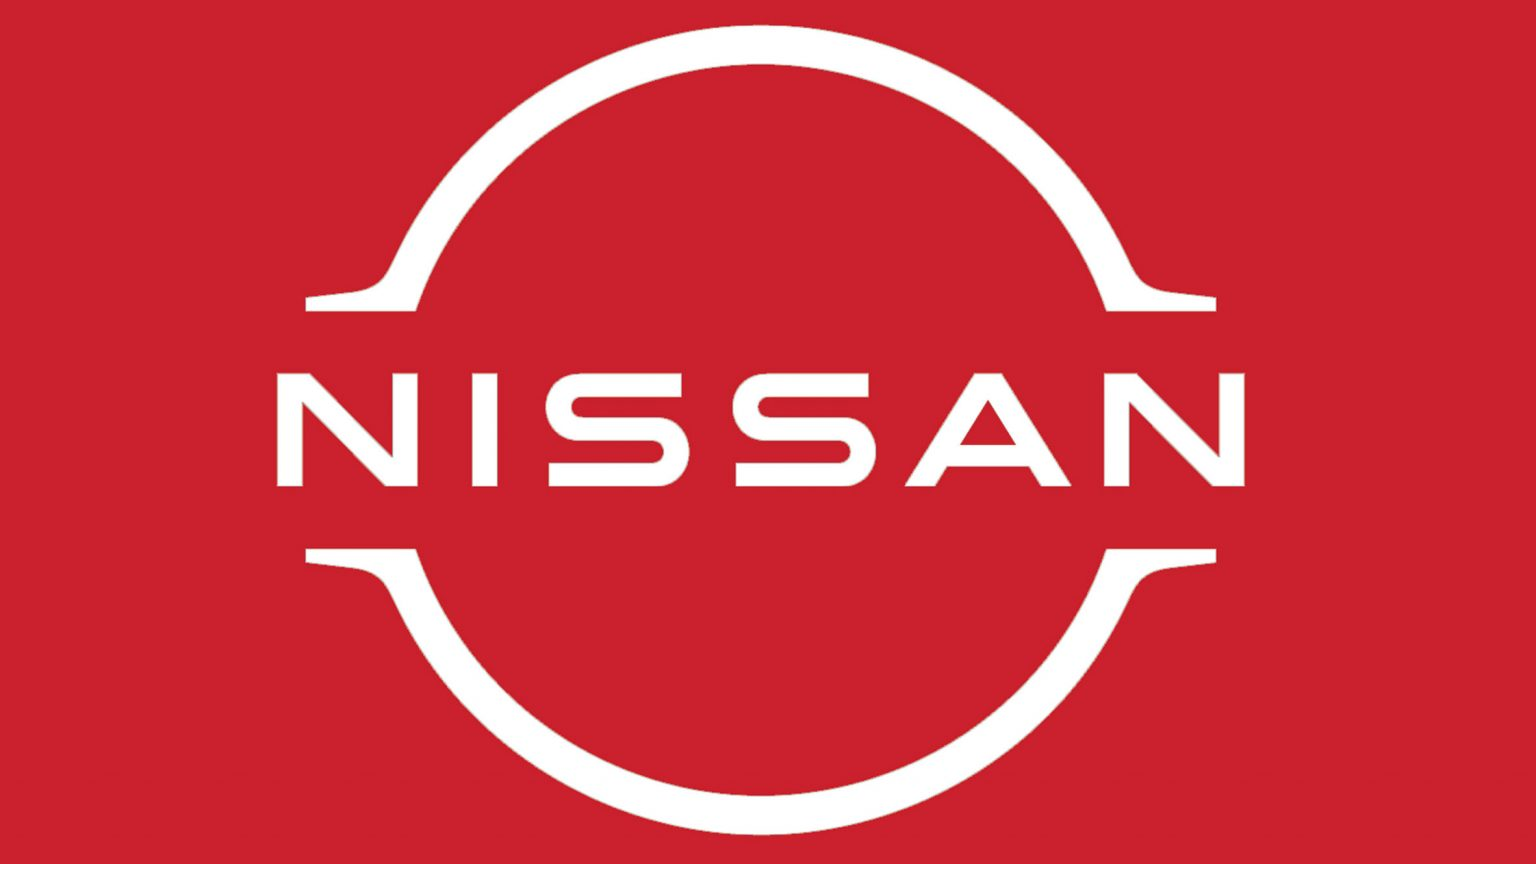 Nissan's debuted fully-electric vehicle with the brand to roll out flat logo